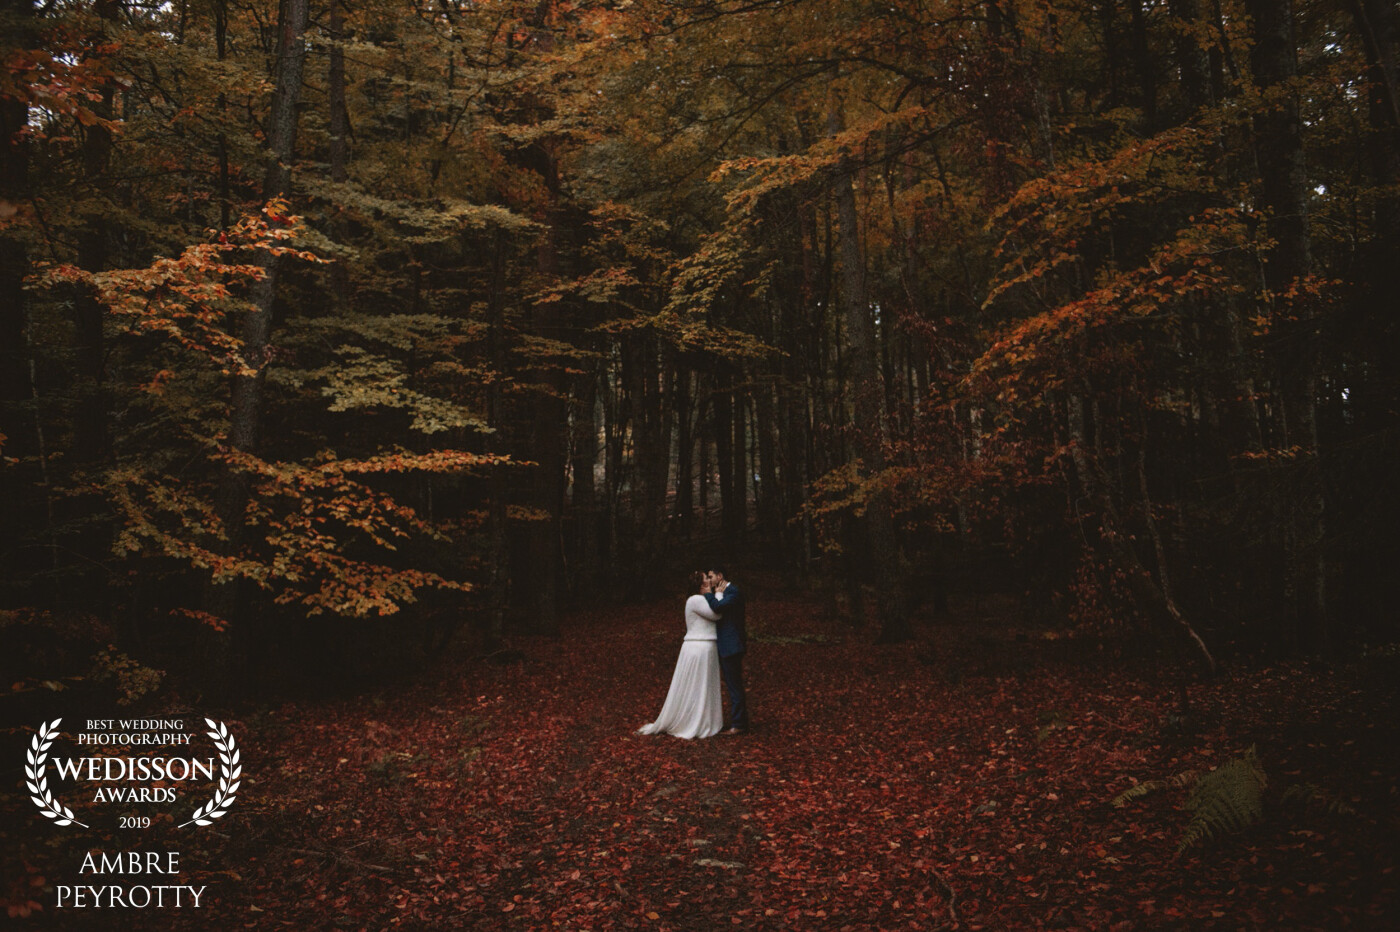 This is actually one of my favorite pictures of this couple. We headed to the forest for their couples pictures and I stumbled upon this part of the woods that was filled with branches searching for light, hence the same direction they were taking!